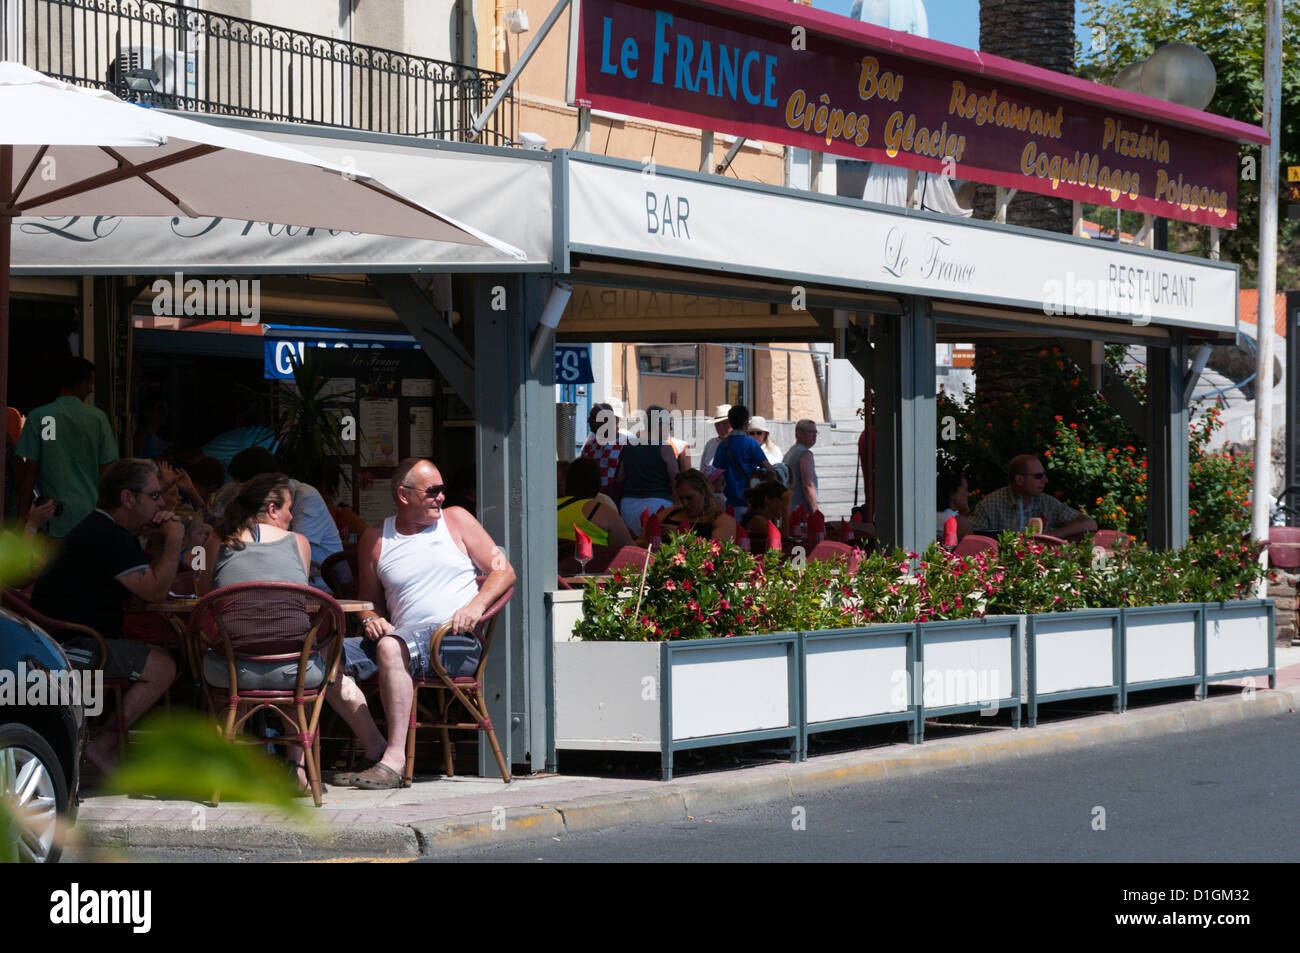 Le France" bar and restaurant in Port Vendres, France Stock Photo - Alamy